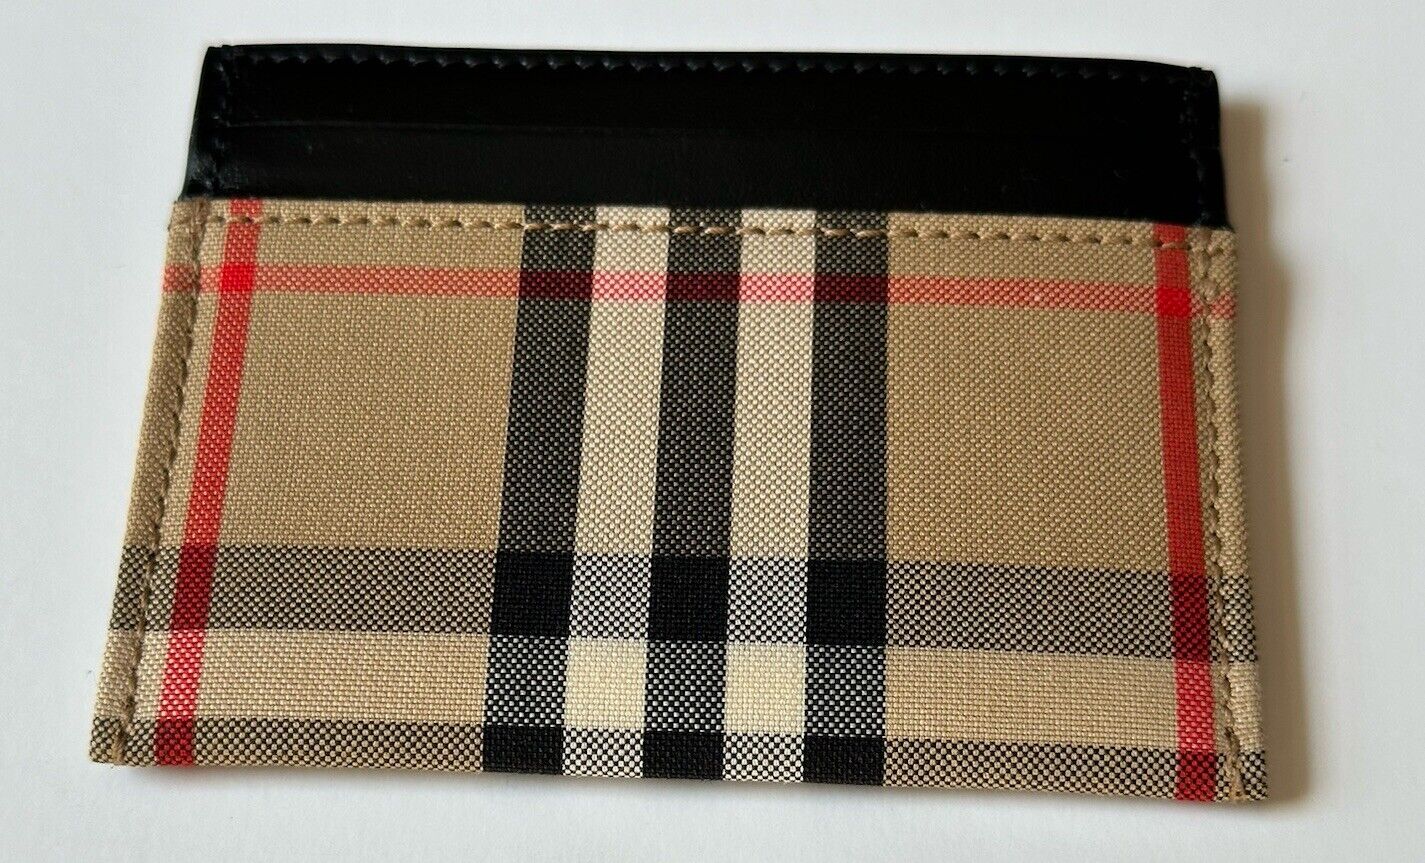 Burberry Vintage Check Archive Beige/Black Leather Card Case 8075442 IT NWT $230